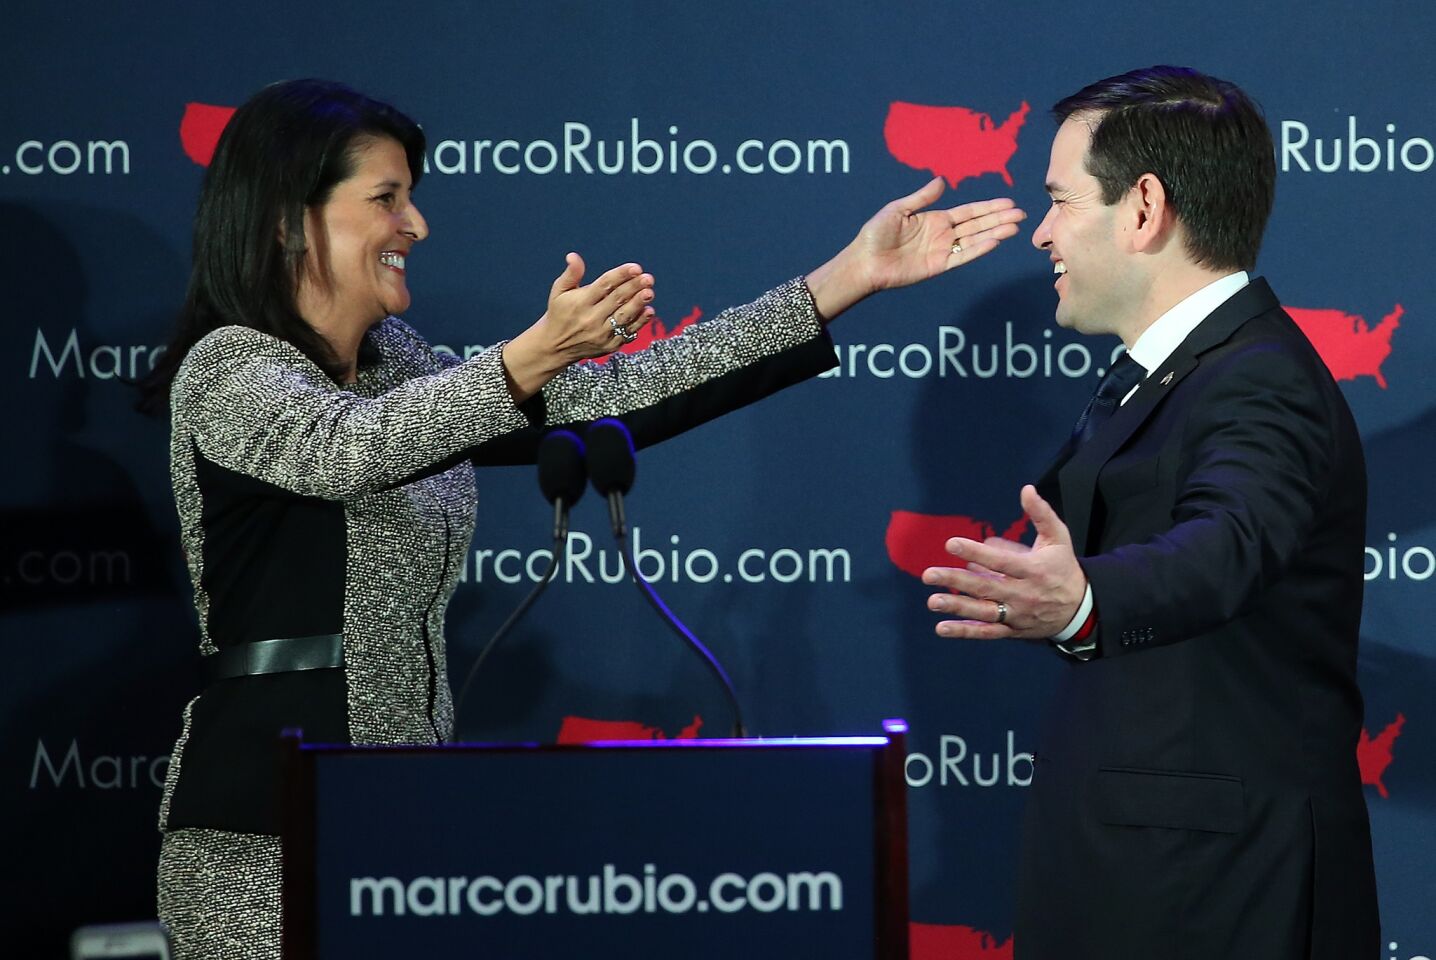 Republican presidential candidate Marco Rubio is greeted by South Carolina Gov. Nikki Haley before addressing supporters at a primary night event in Columbia.